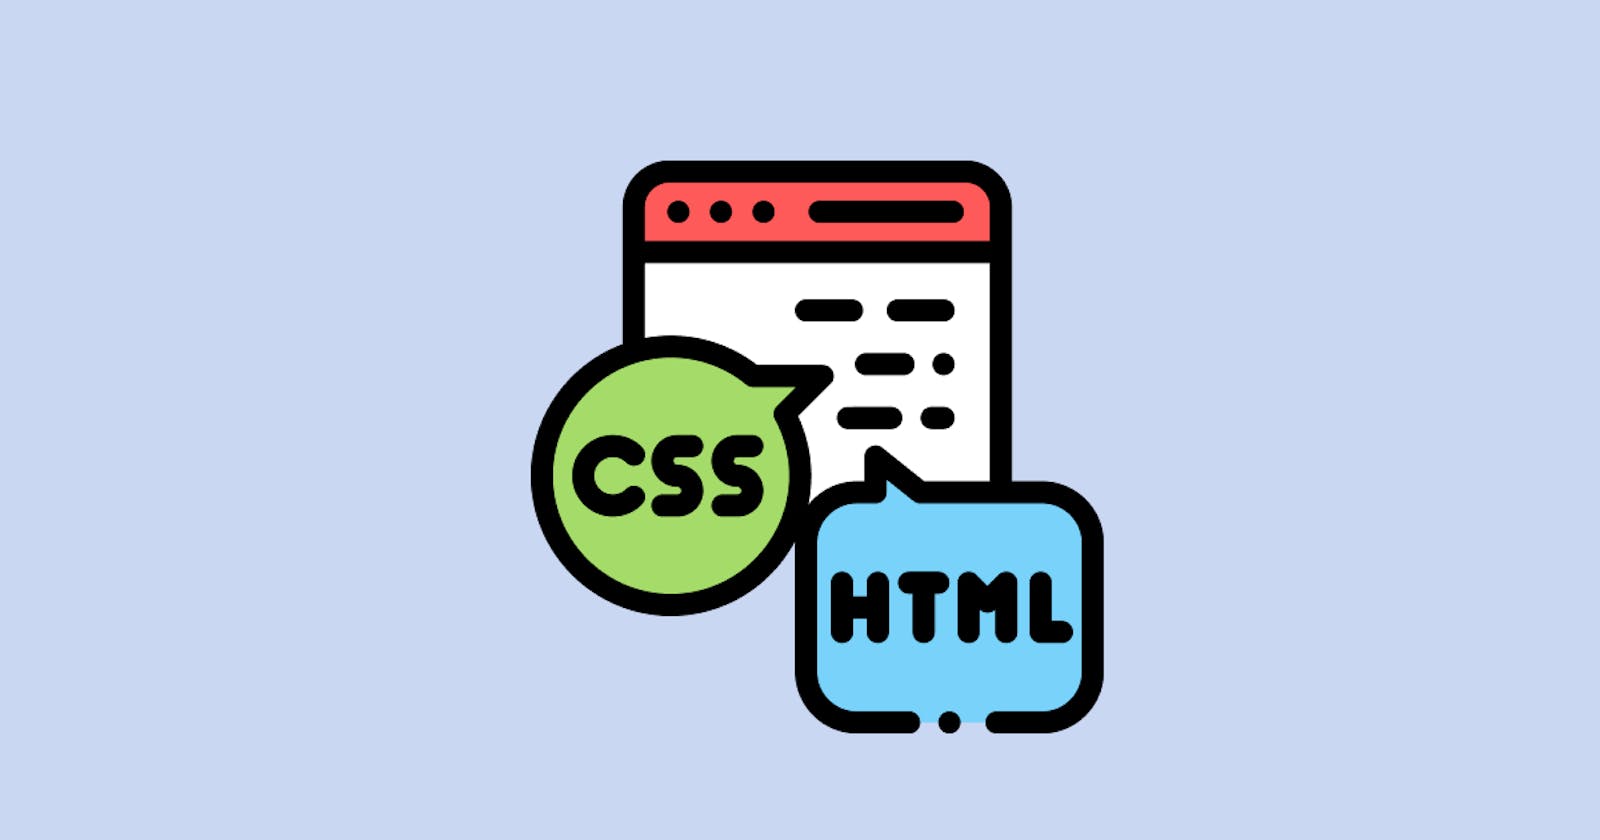 Formatting in CSS